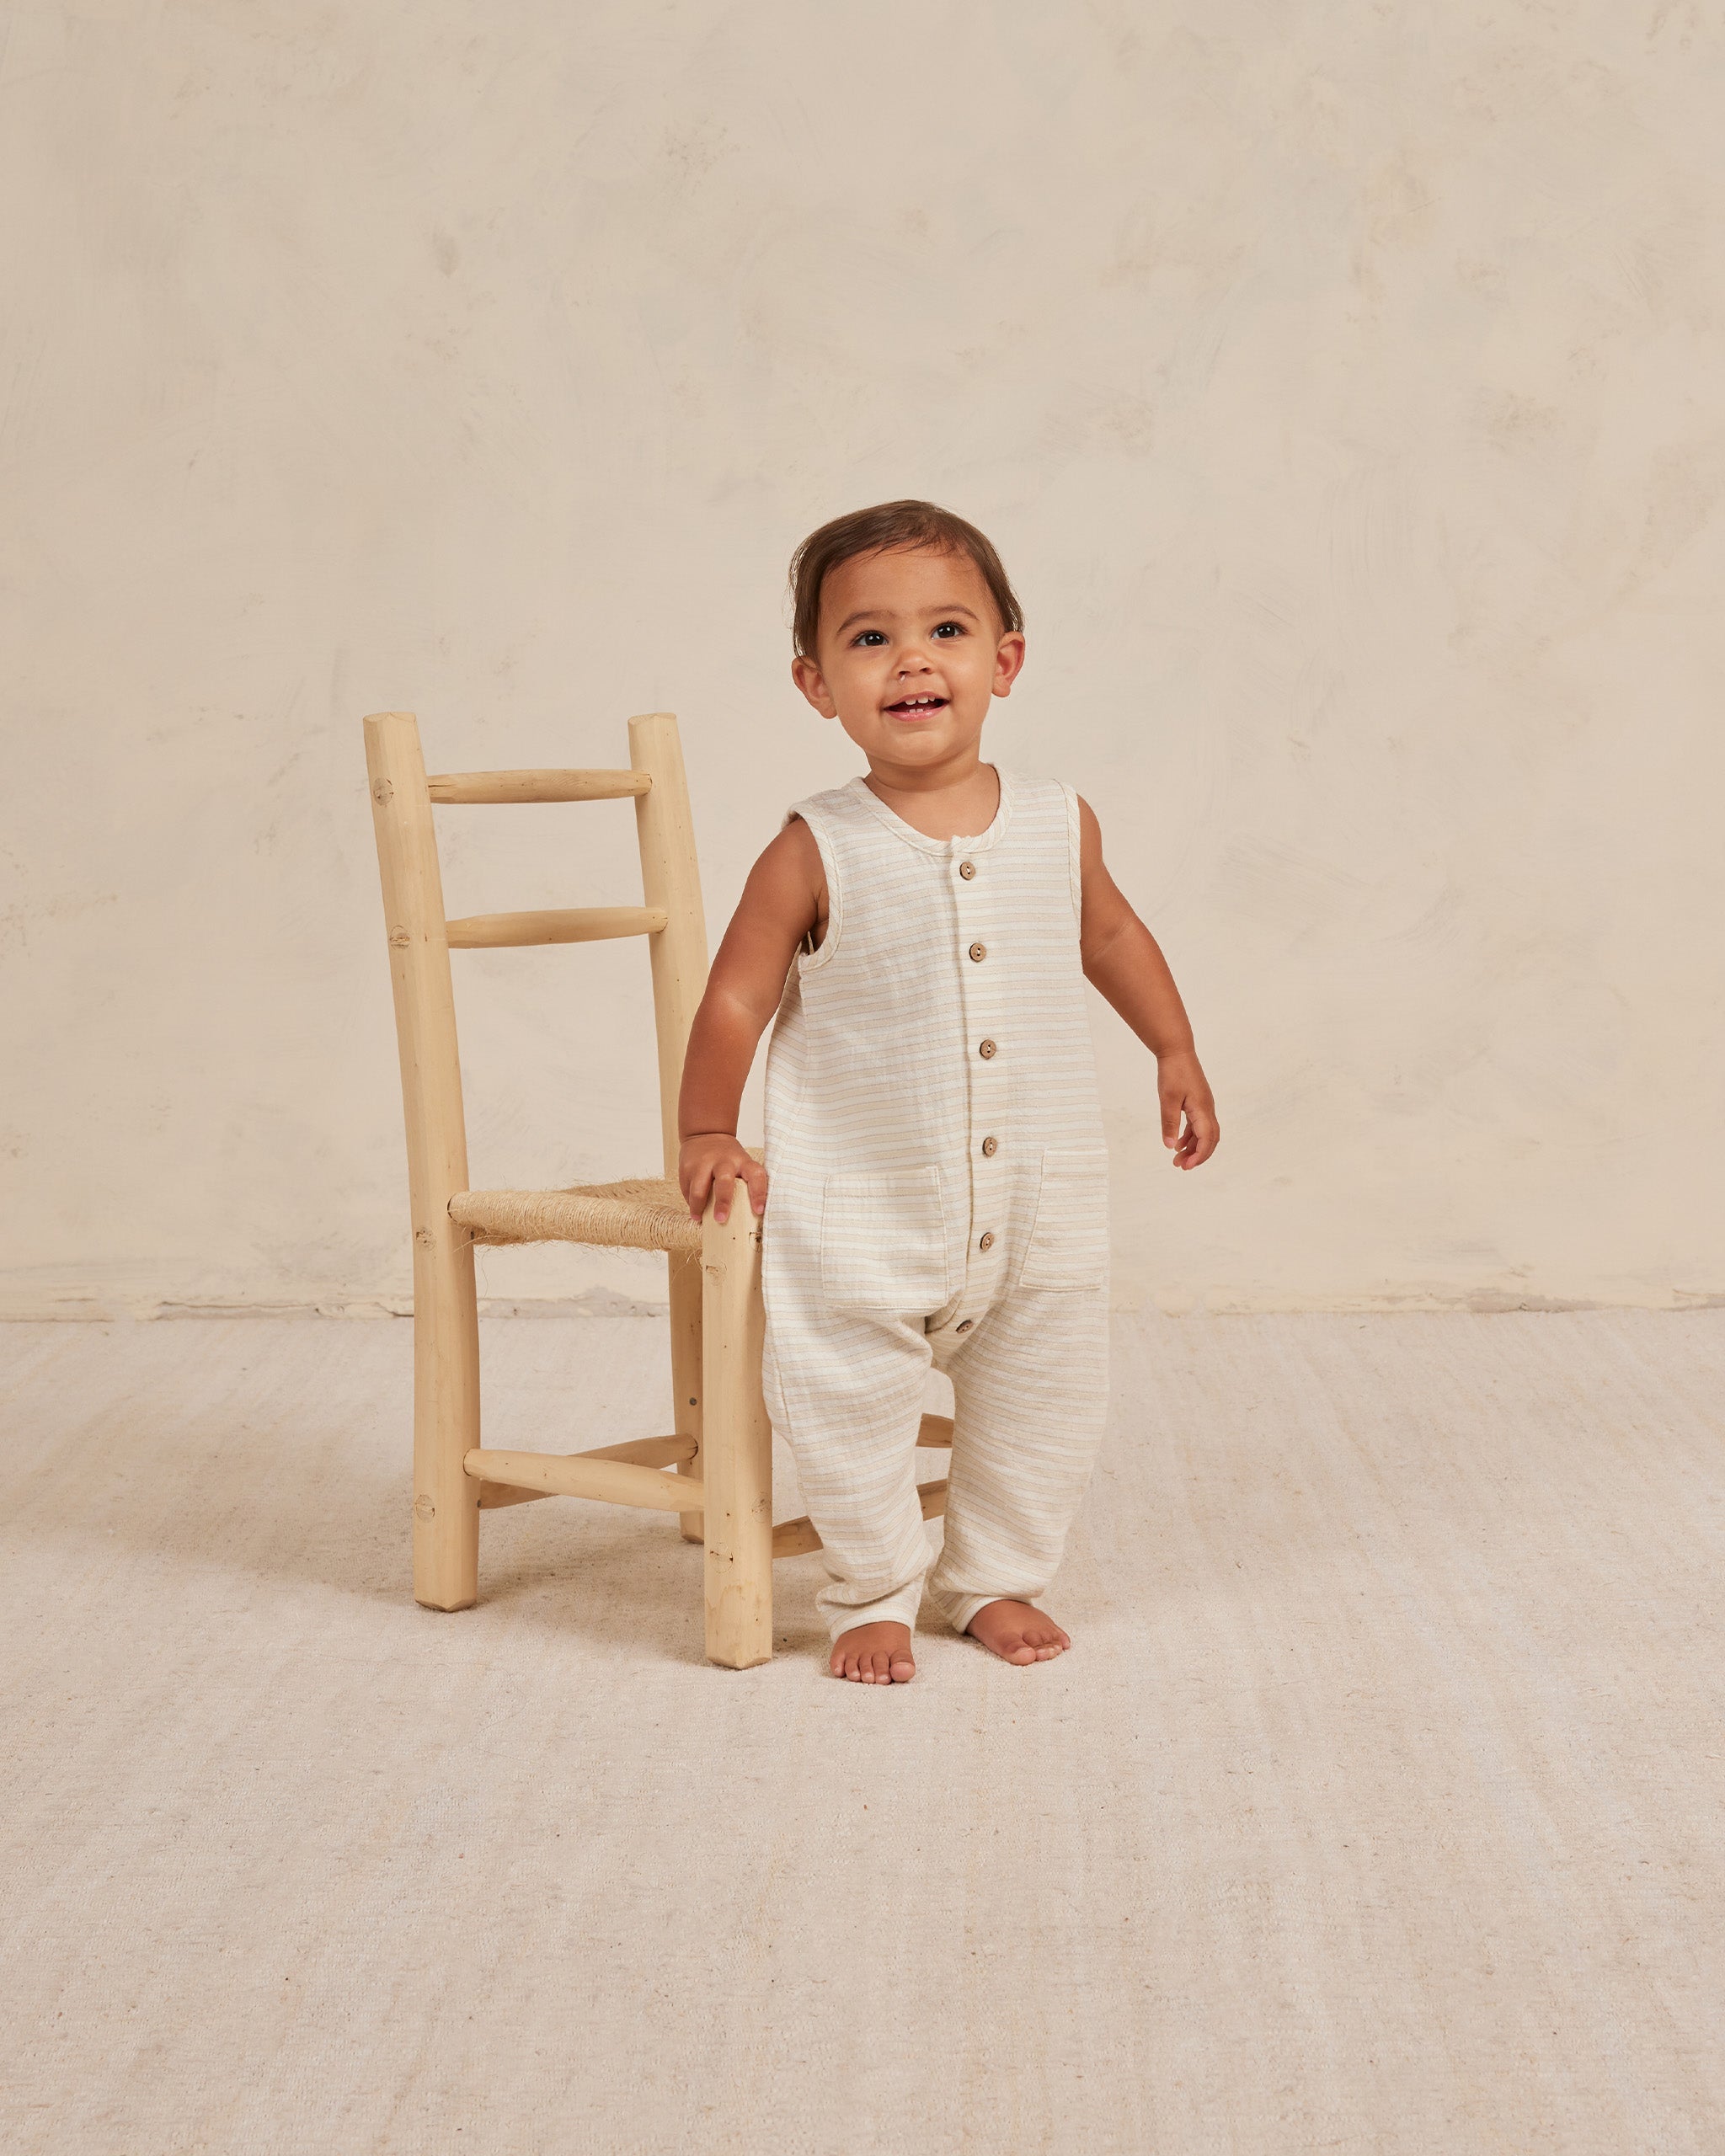 Sleeveless Pocketed Jumpsuit || Lemon Stripe - Rylee + Cru | Kids Clothes | Trendy Baby Clothes | Modern Infant Outfits |